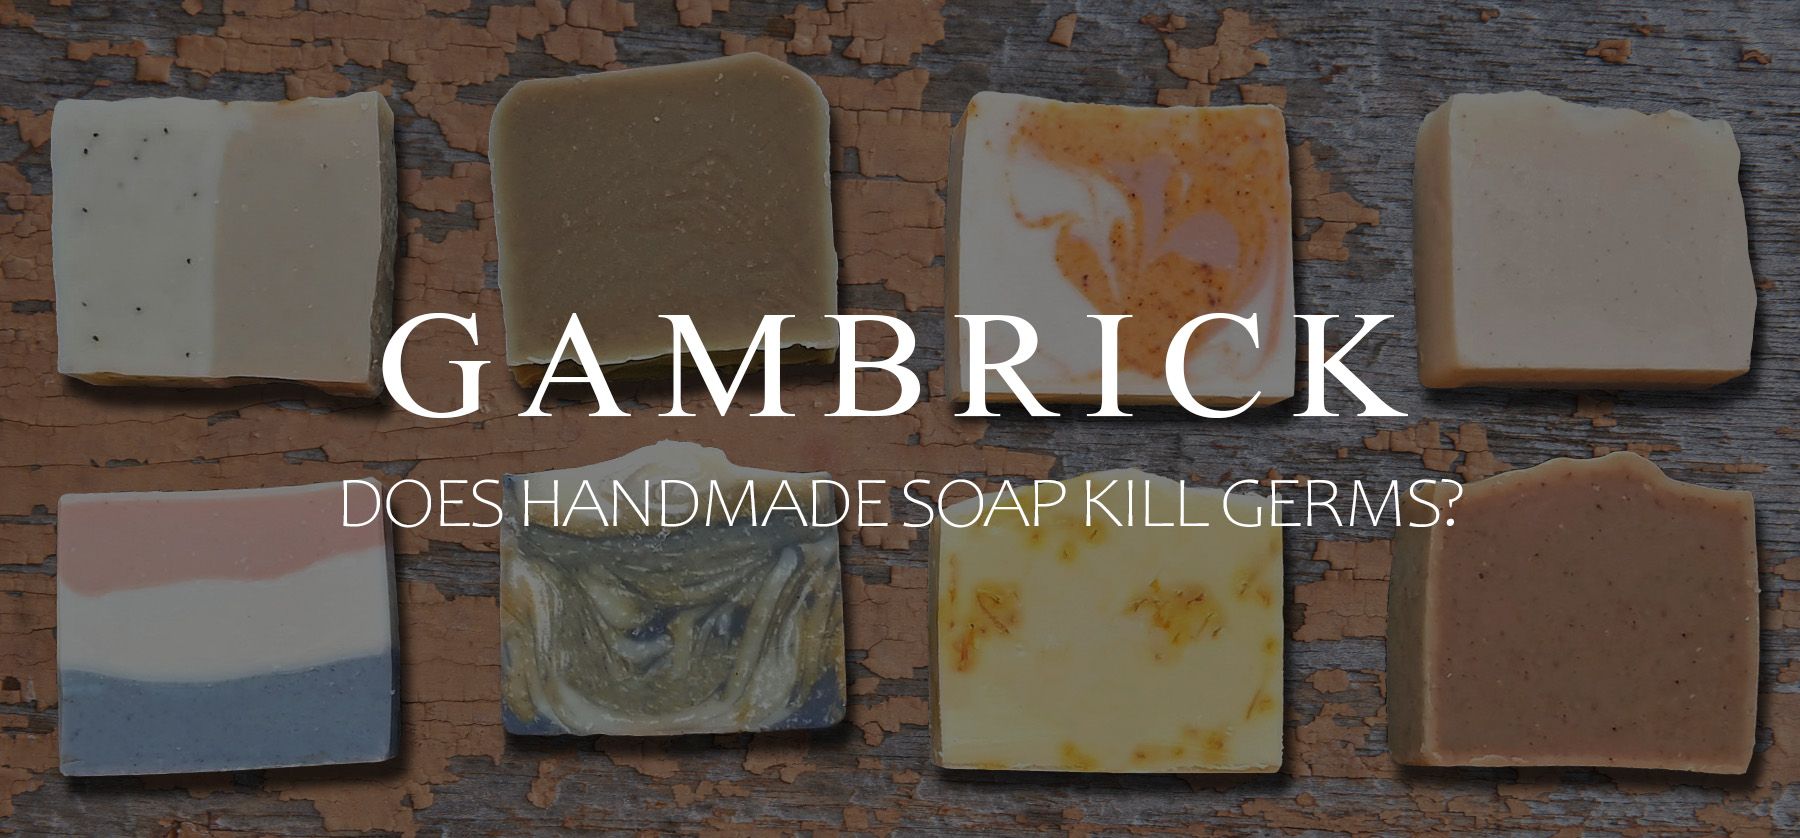 does handmade soap kill germs banner 1.1